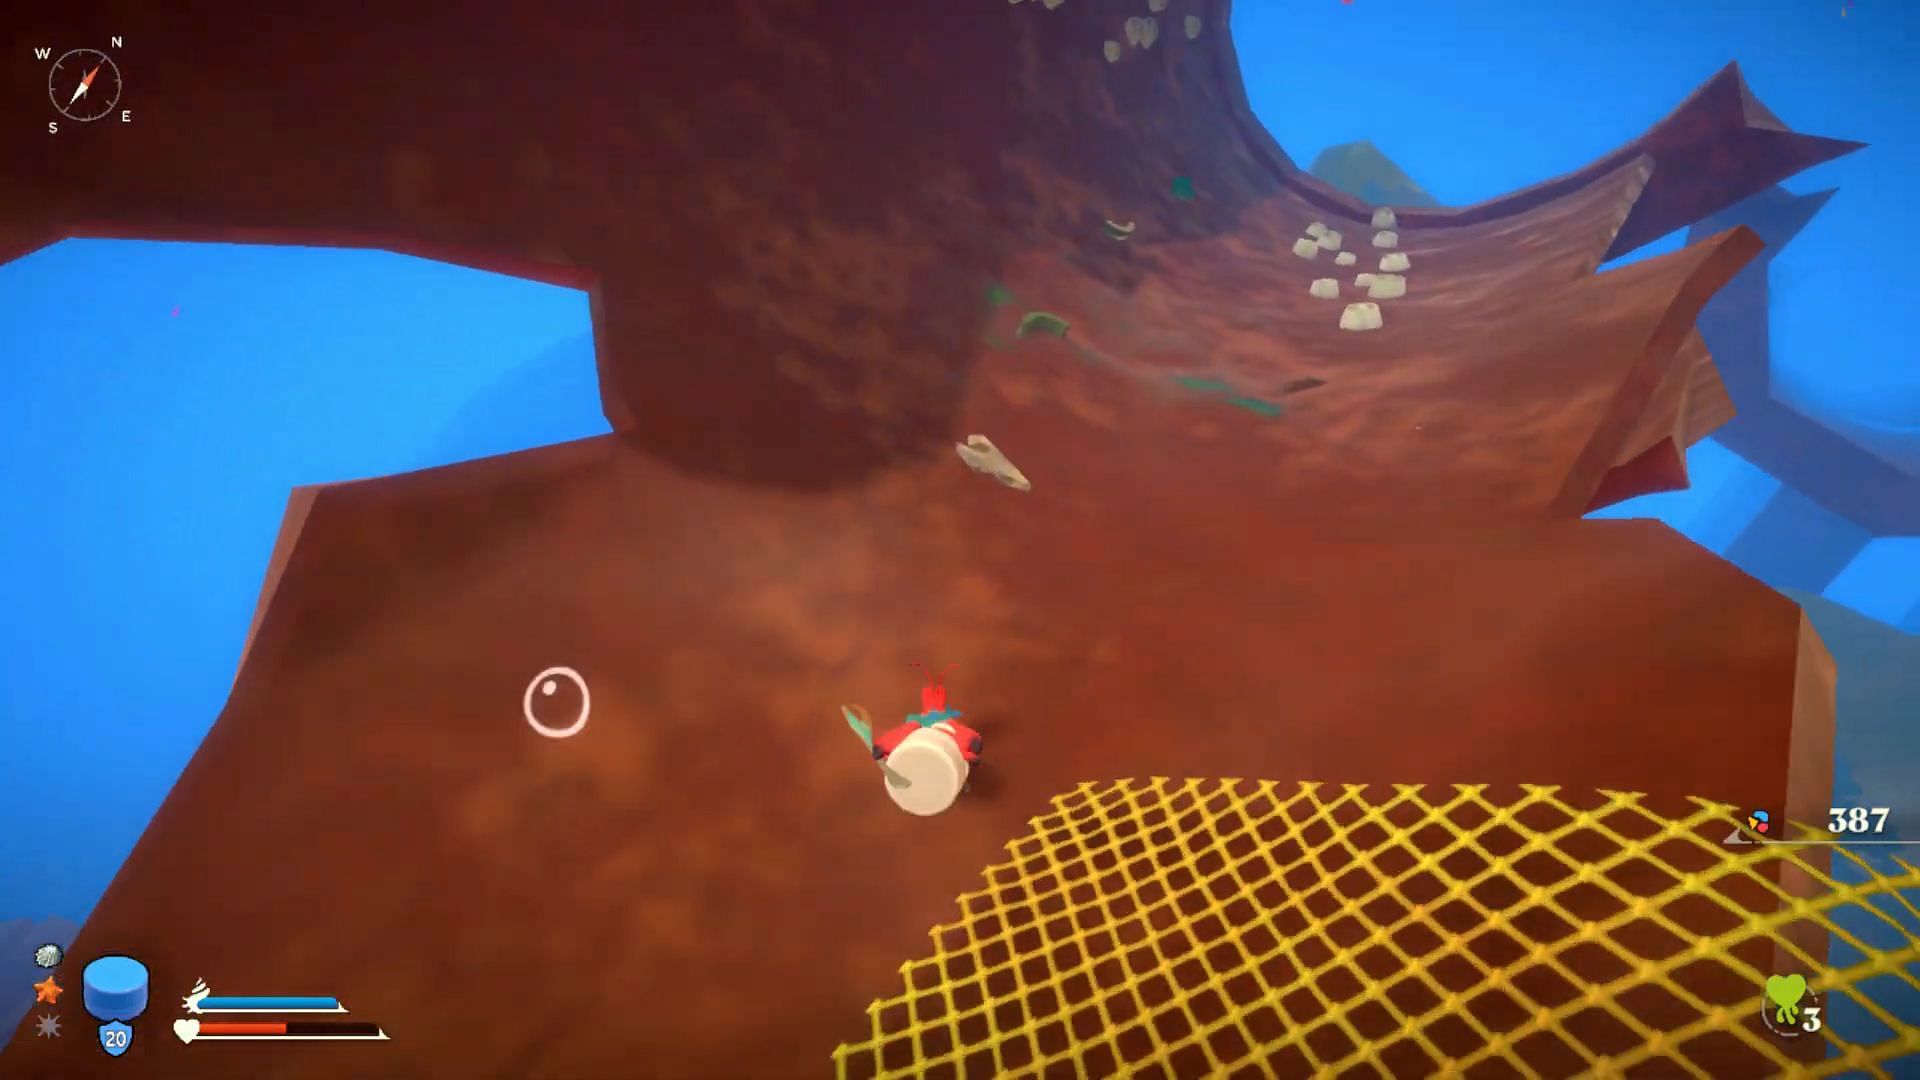 Land on the pipes to reach Moon Caves in Another Crab&#039;s Treasure. (Image via Aggro Crab || Karmakazi on YouTube)